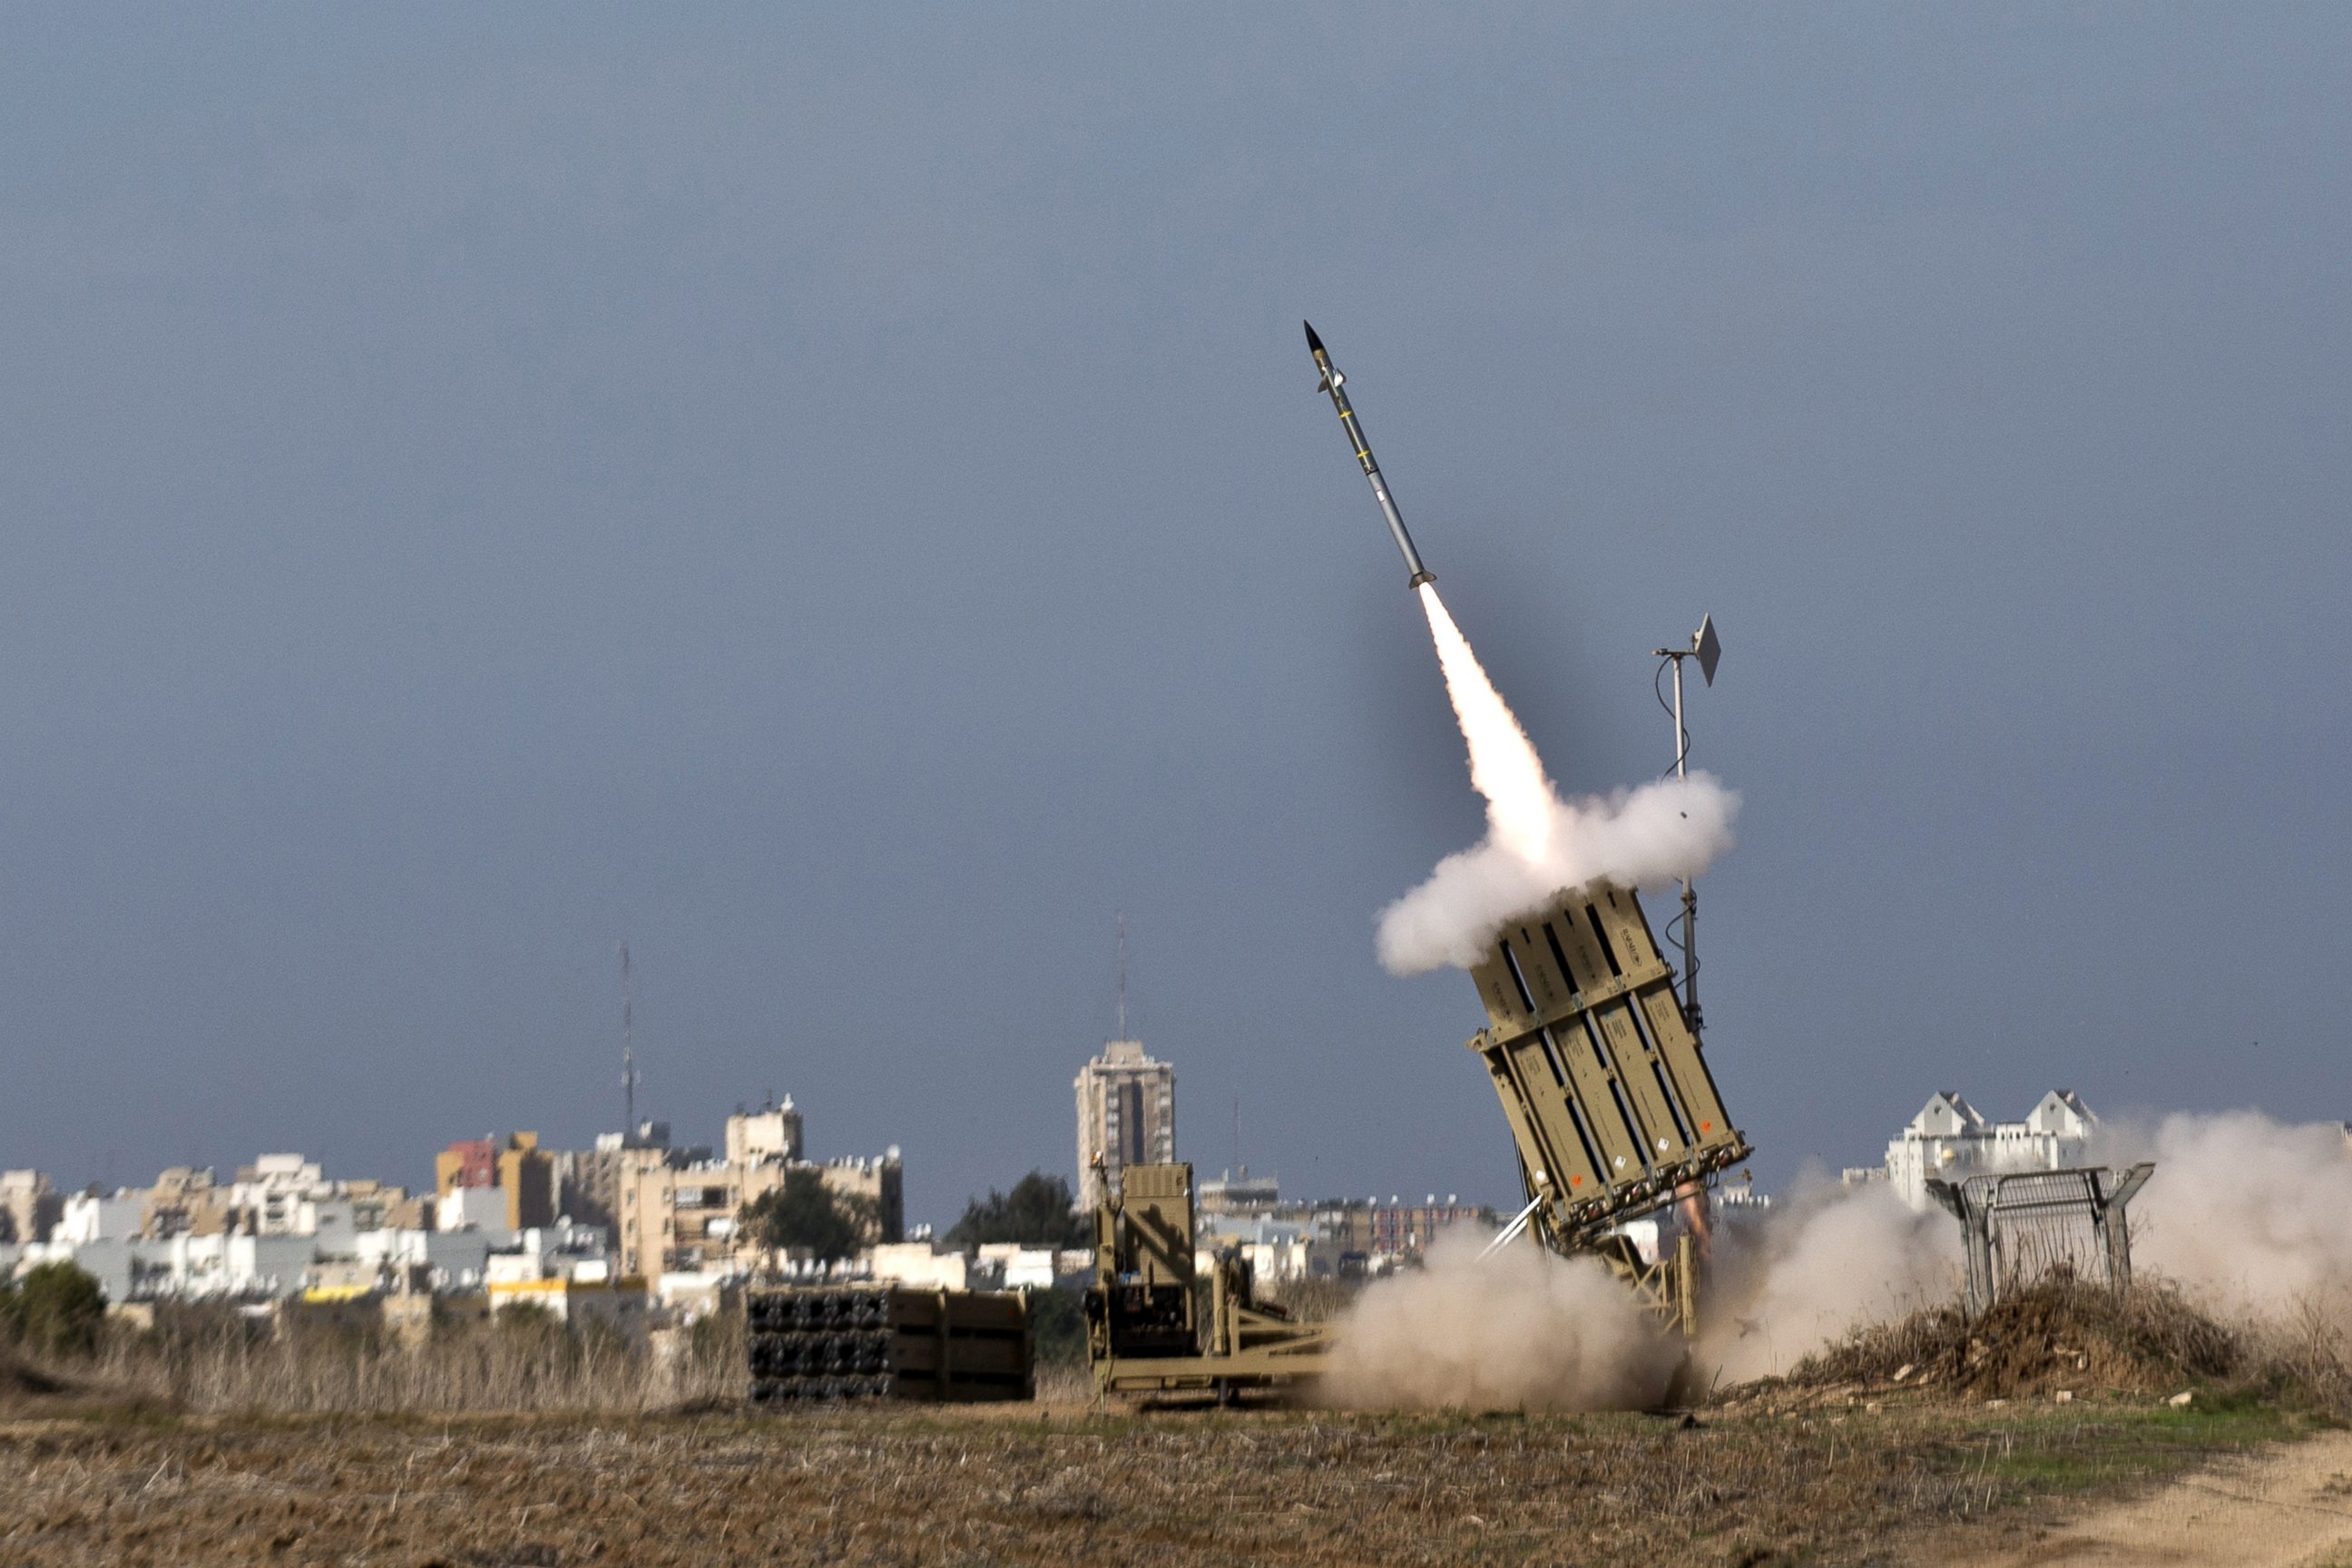 PHOTO: An Israeli missile is launched from the Iron Dome defence missile system in the southern Israeli city of Ashdod in response to a rocket launched from the nearby Palestinian Gaza Strip on November 18, 2012.